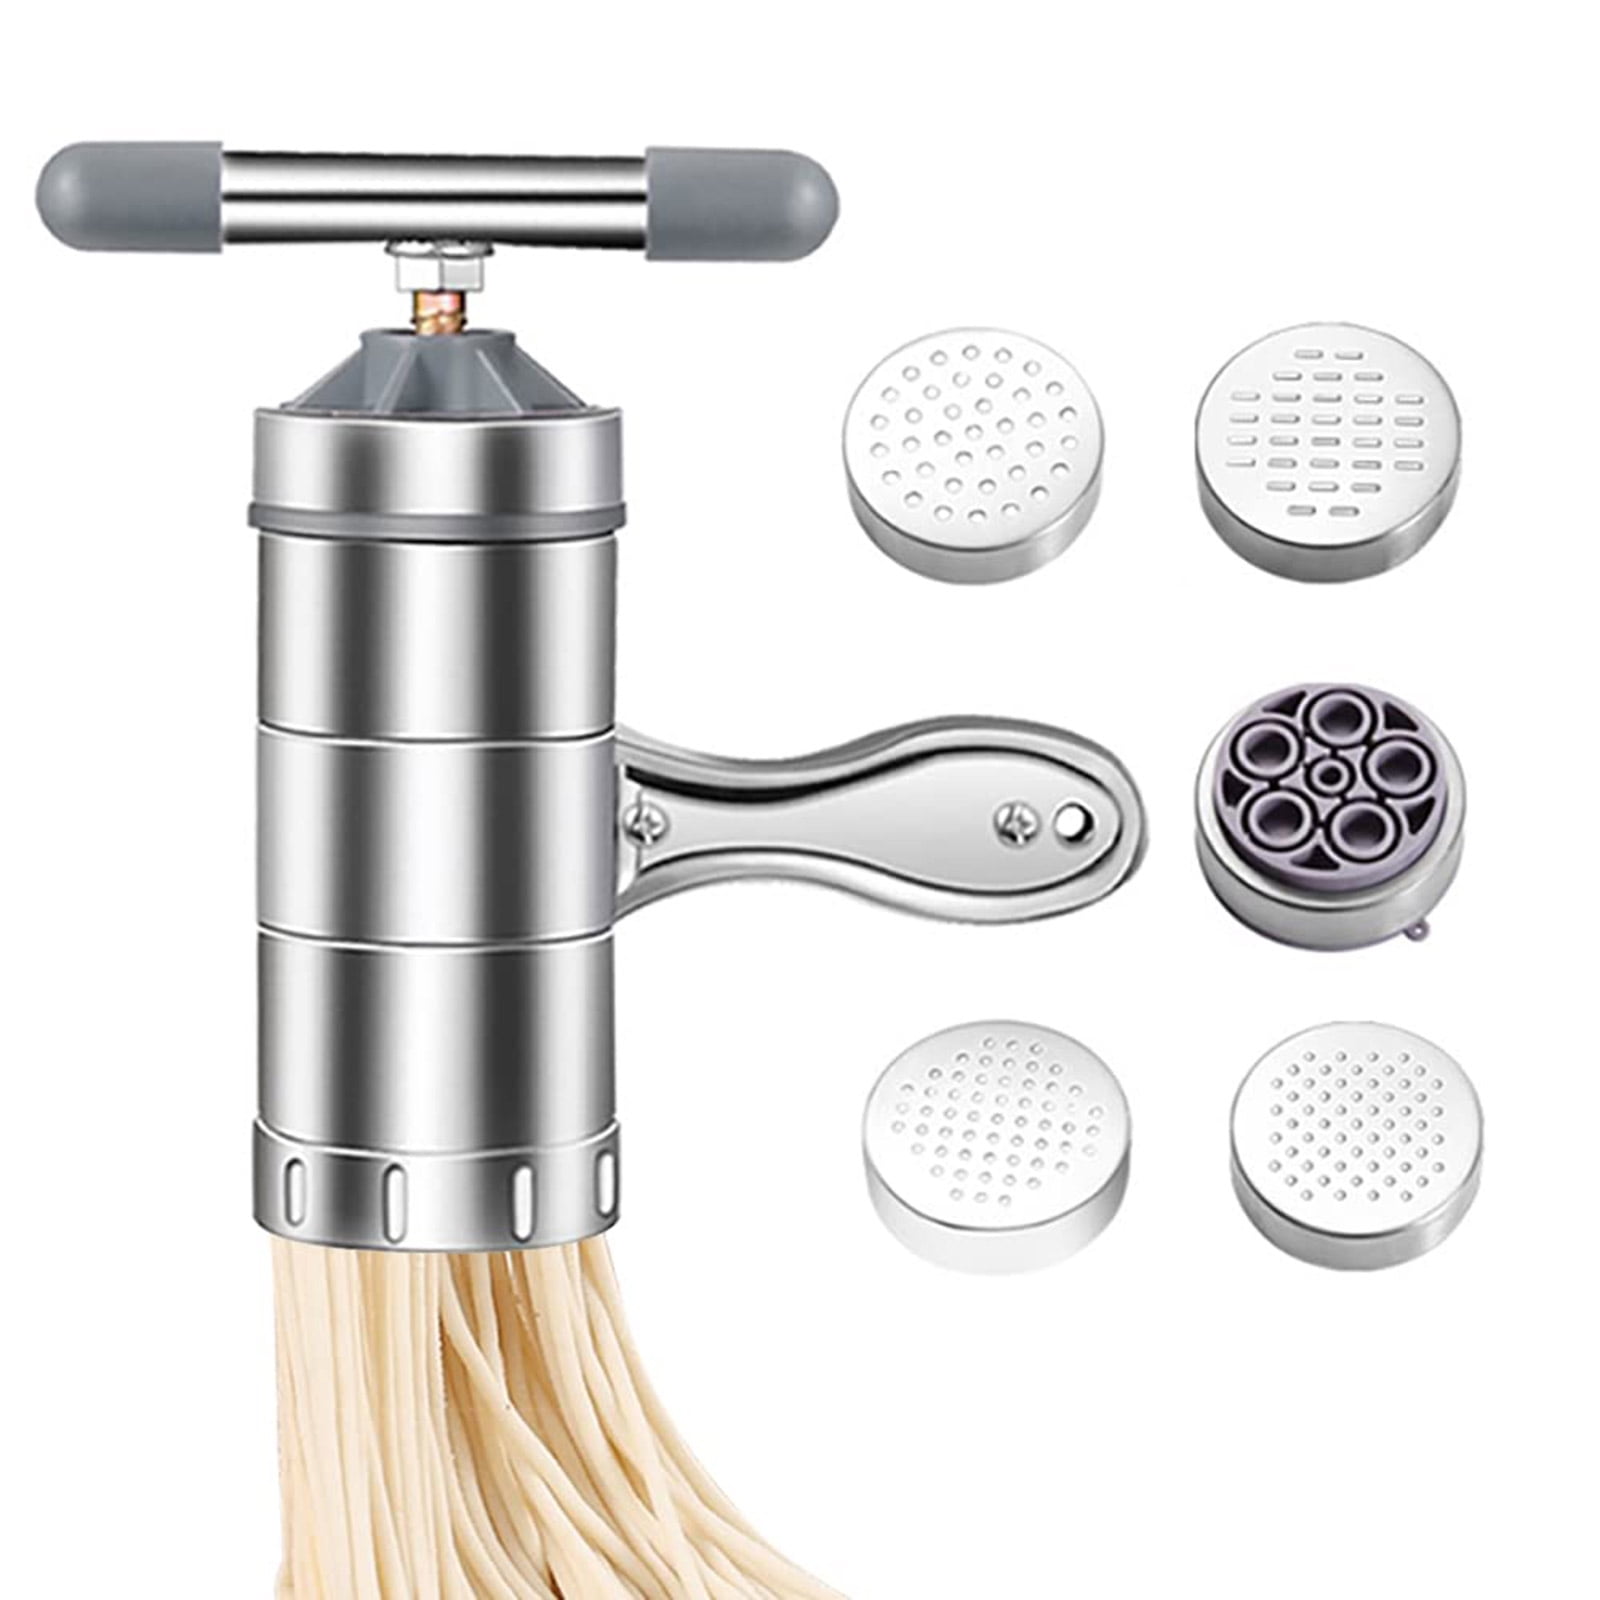 Stainless Steel Manual Pasta Maker, Noodle Machine with Six Different Noodle  Molds, Fast Pressing Pasta Machine, Travel Portable Compact Noodle Maker,  Can be Used as Fruit Juicer Squeezer